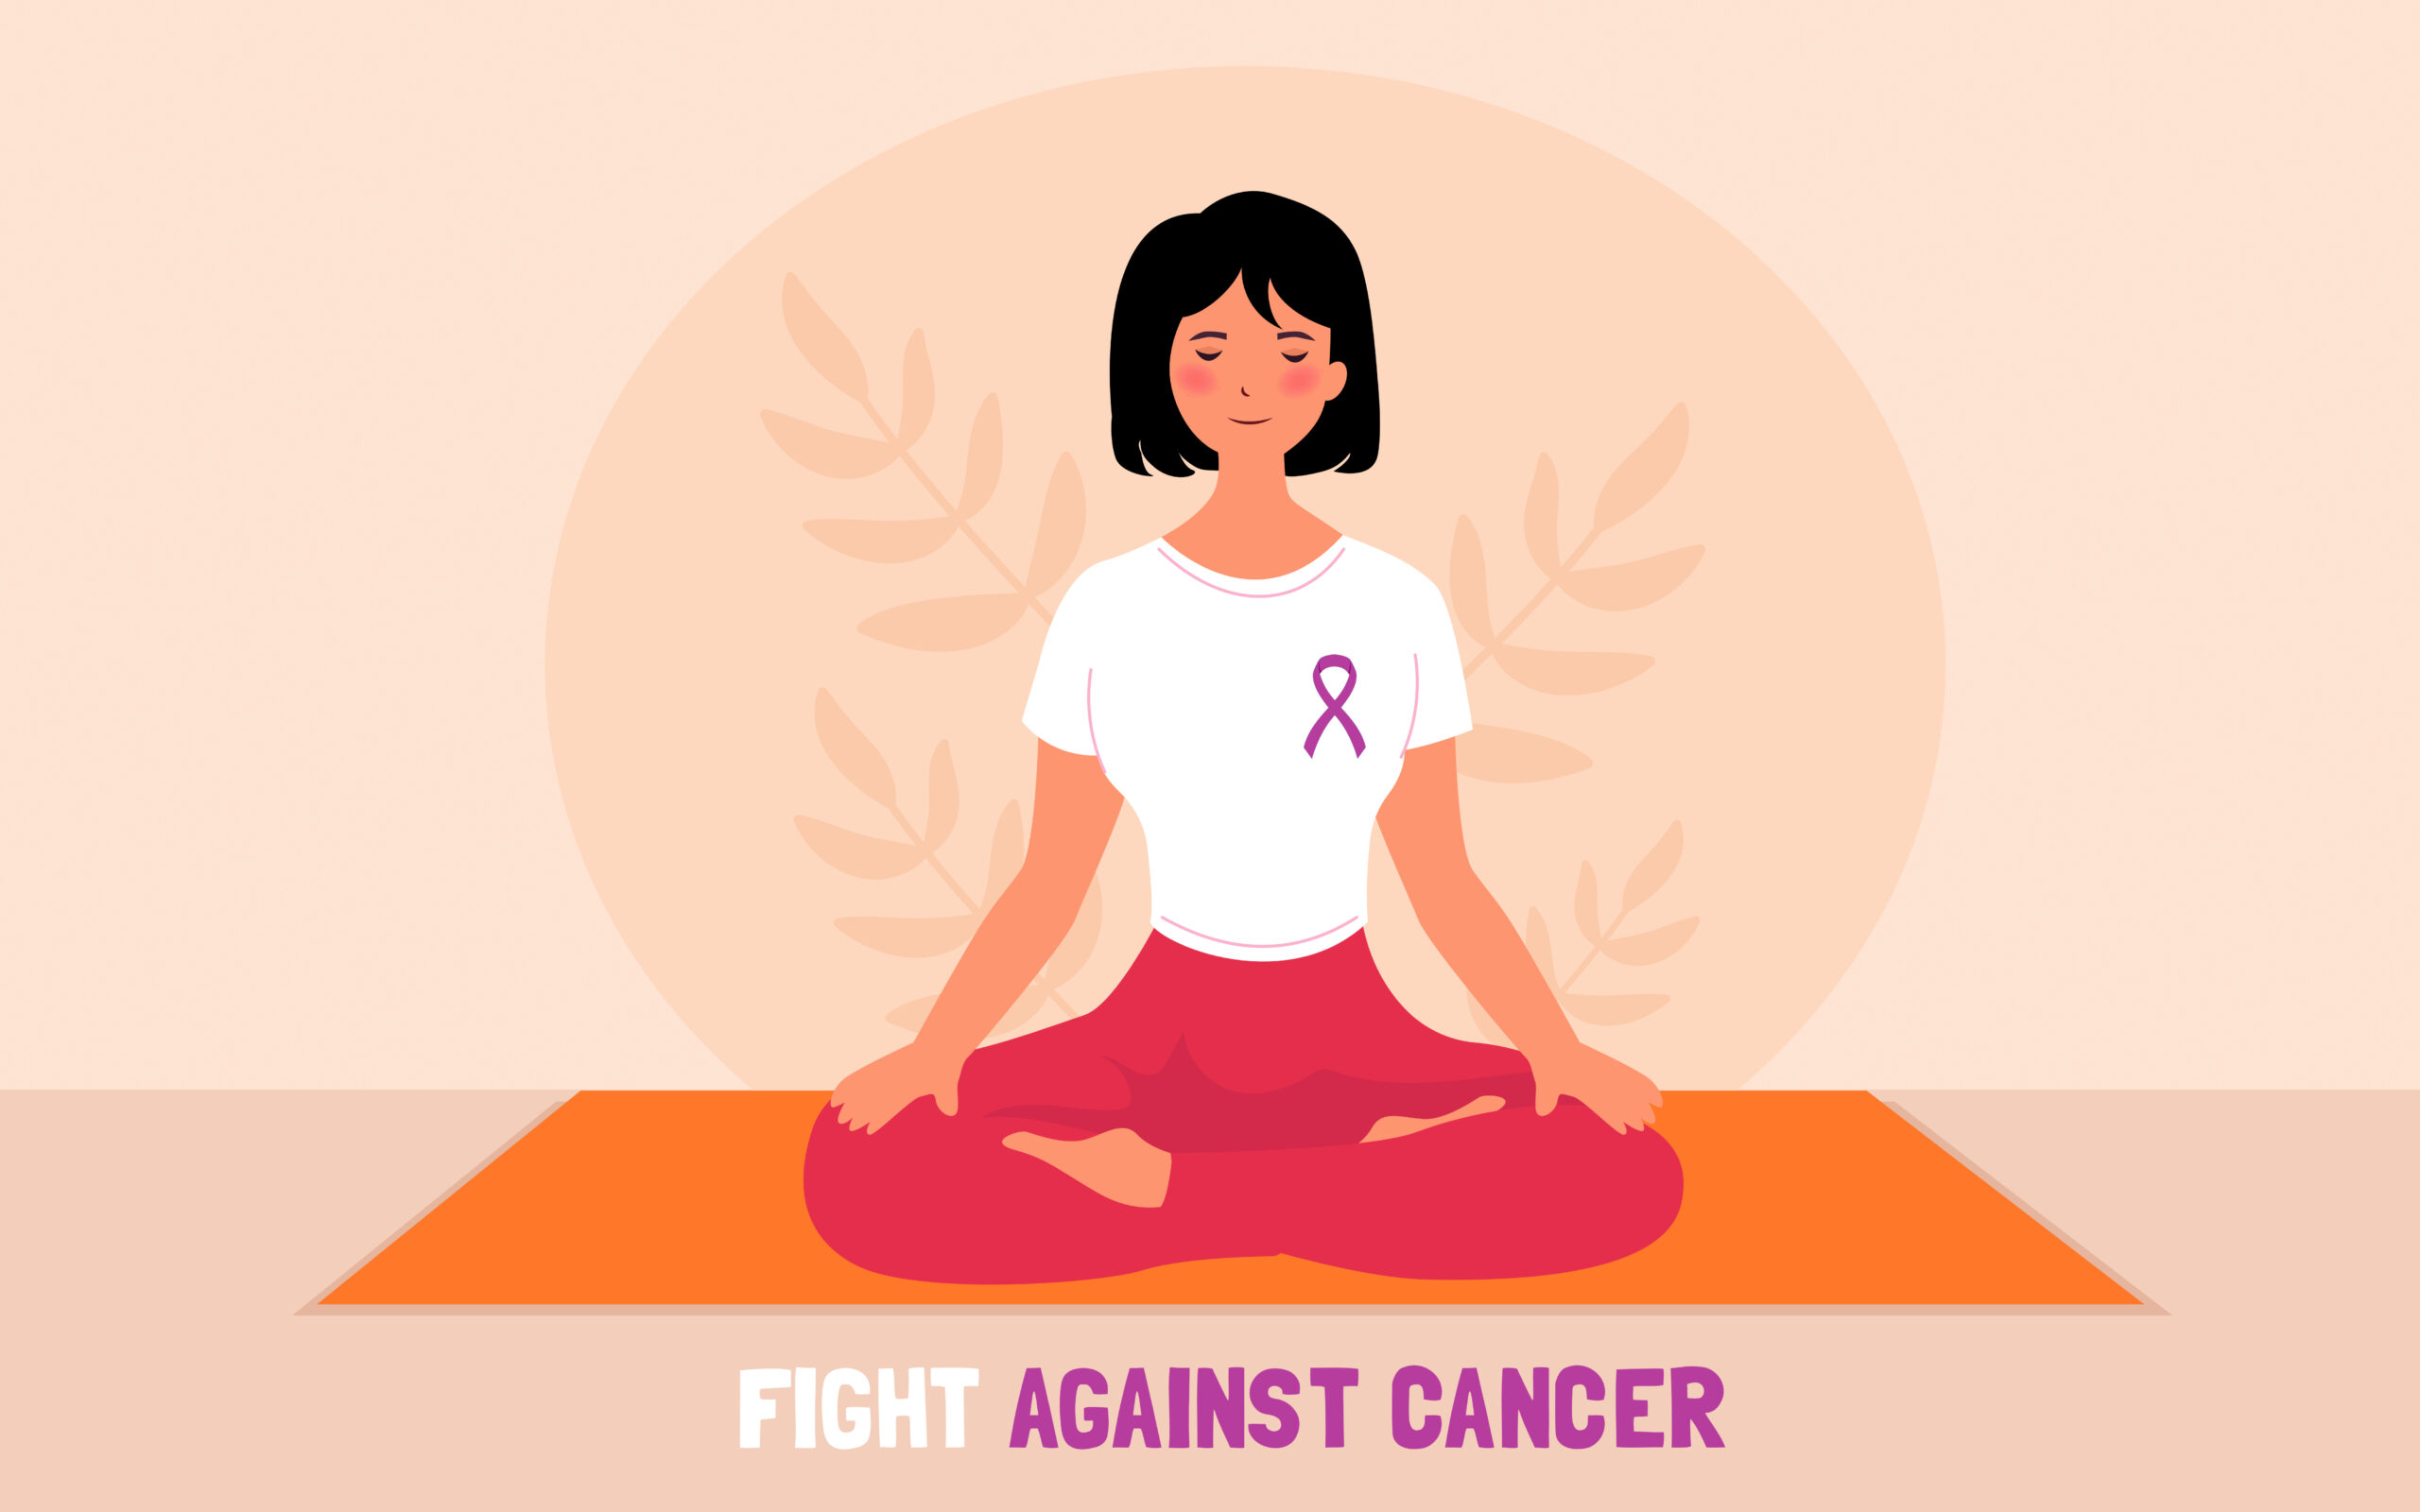 Yoga & walking can cut the risk of cancer developing, says study